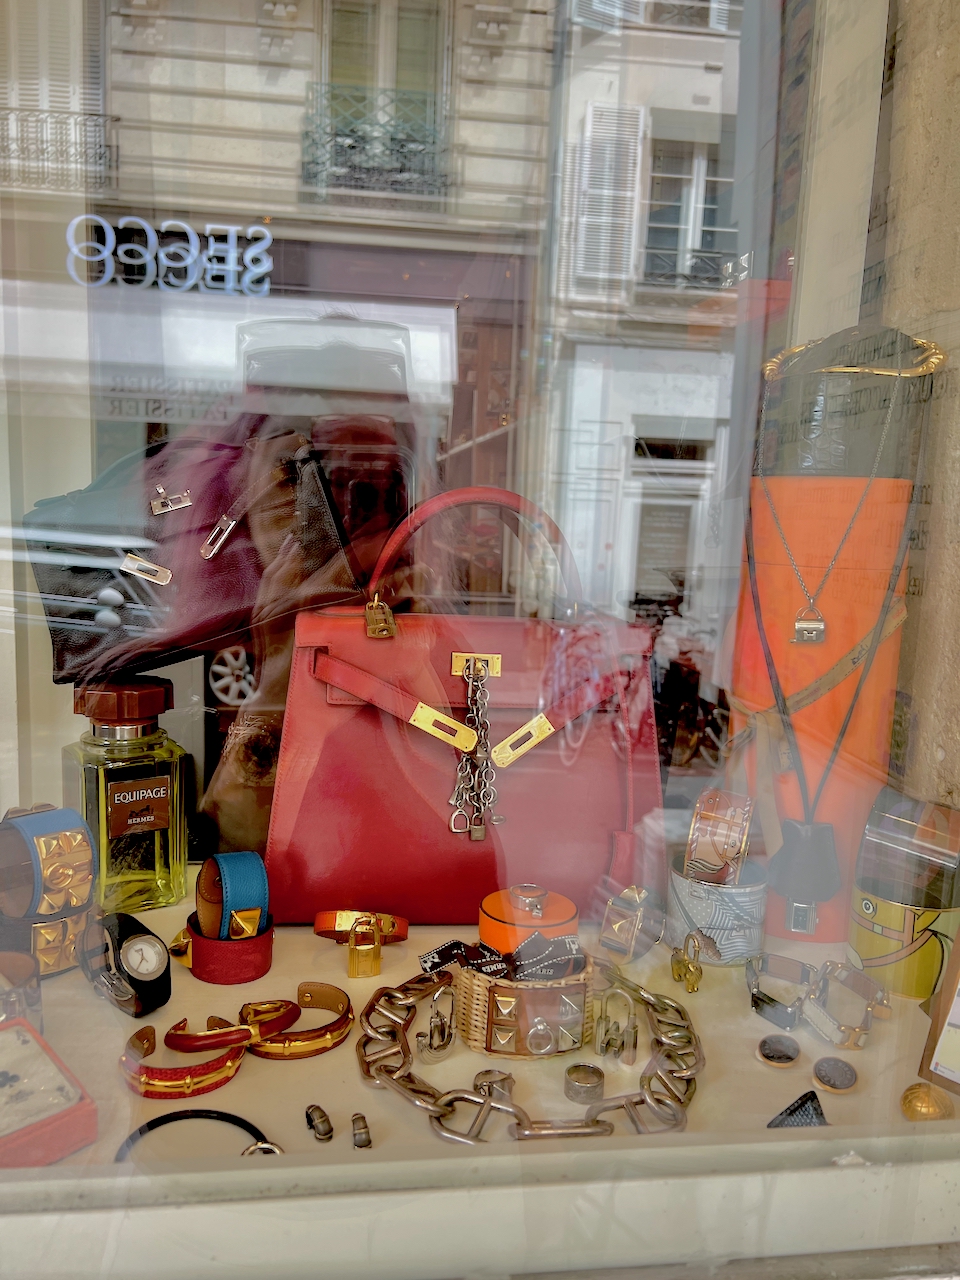 The right (Hermès) window of Les 3 Marches. Photo via @The_Notorious_Pink